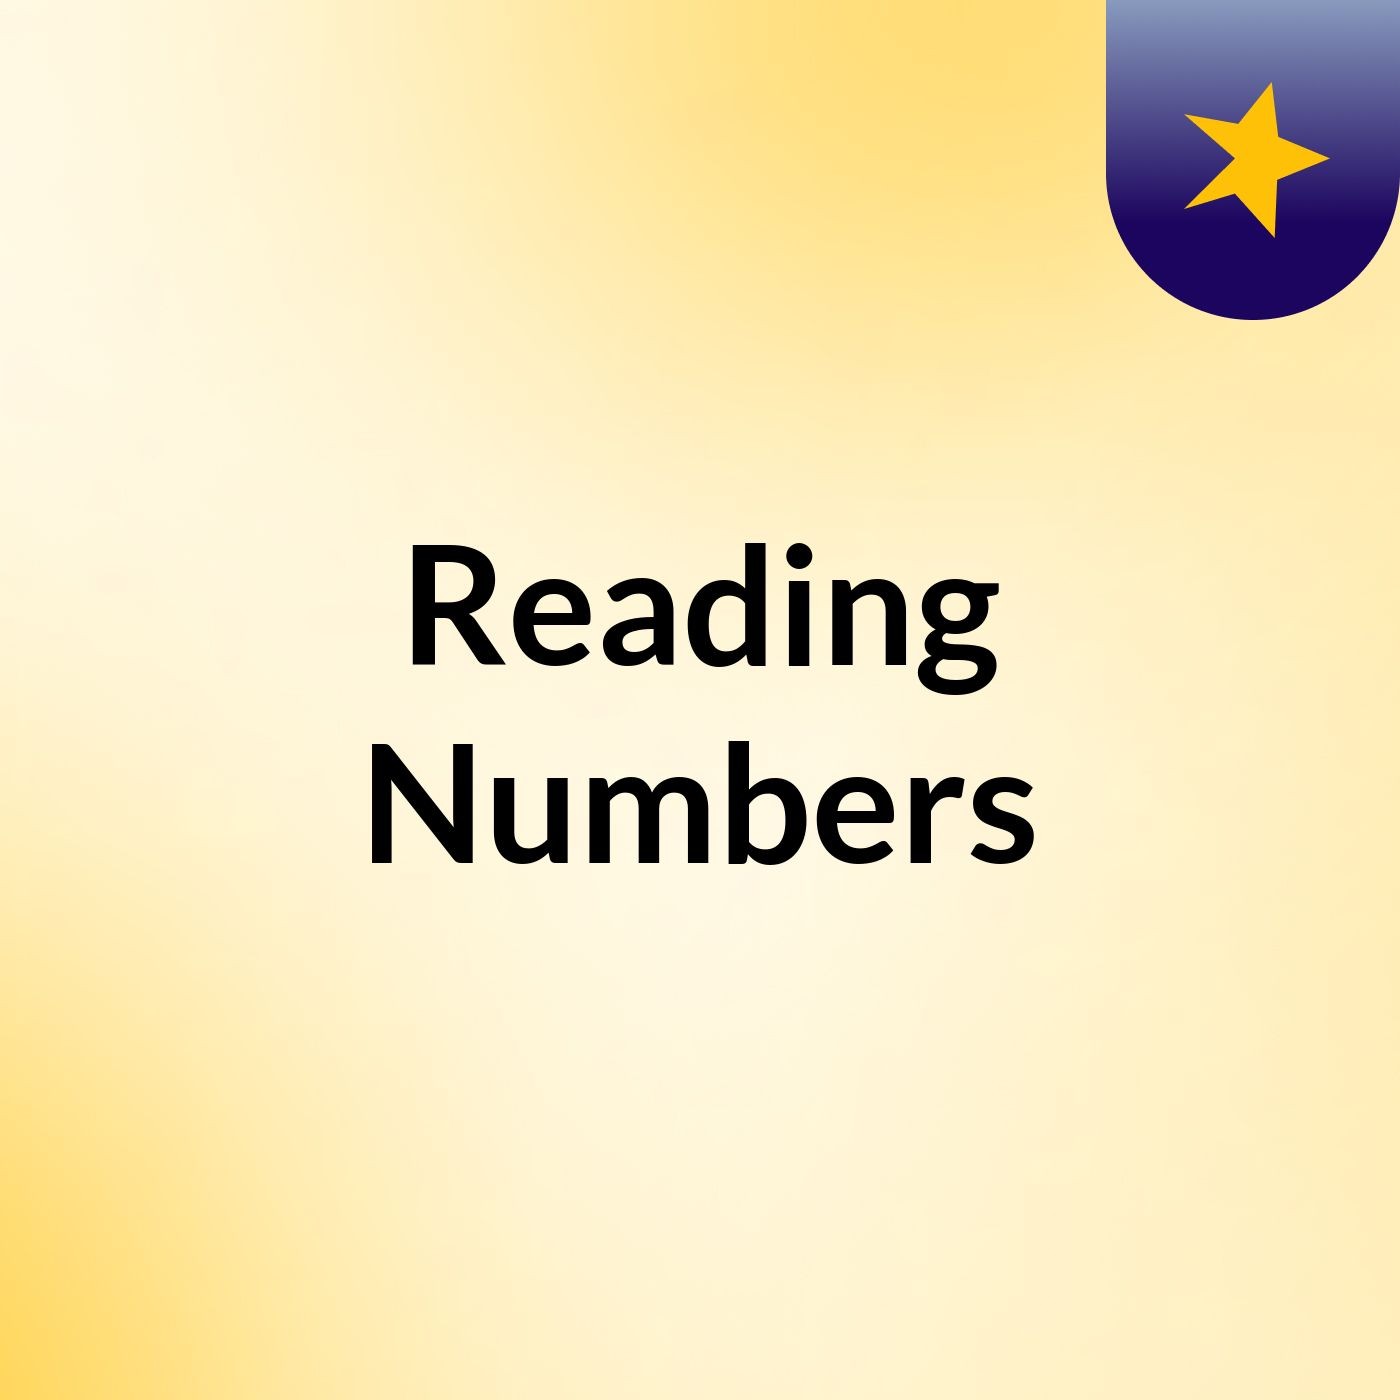 Reading Numbers